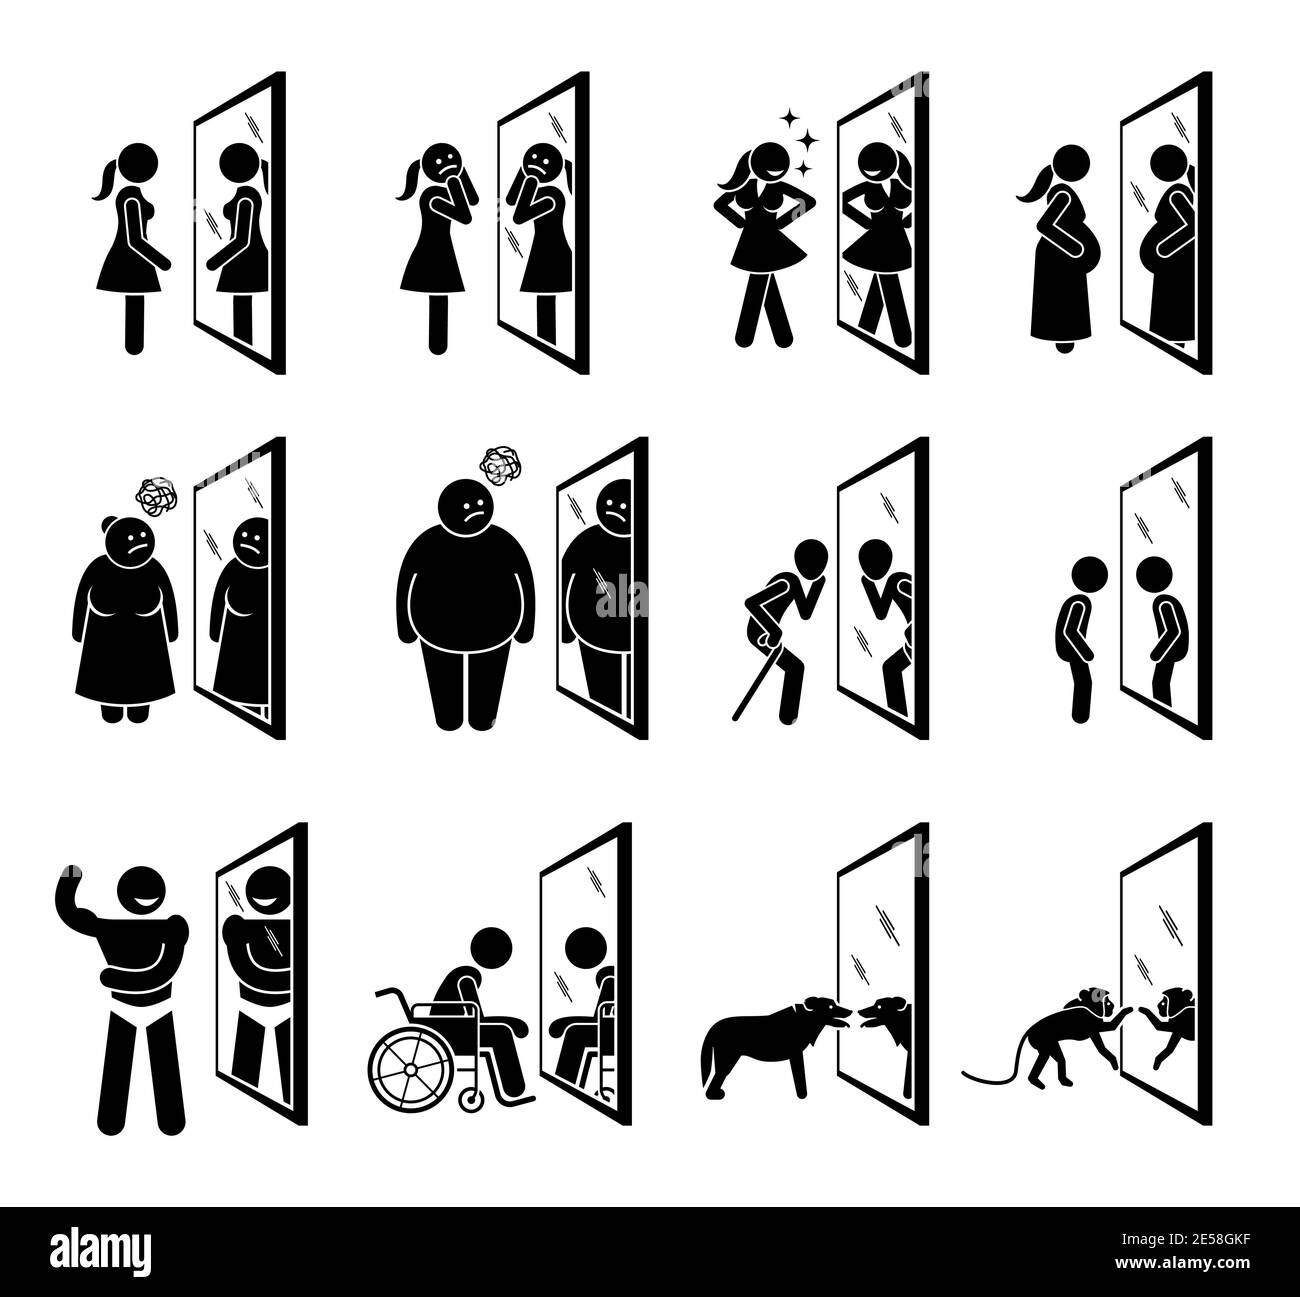 Different people looking into mirror of themselves. Vector illustrations of woman, overweight people, old man, child, muscular man, handicapped, dog, Stock Vector